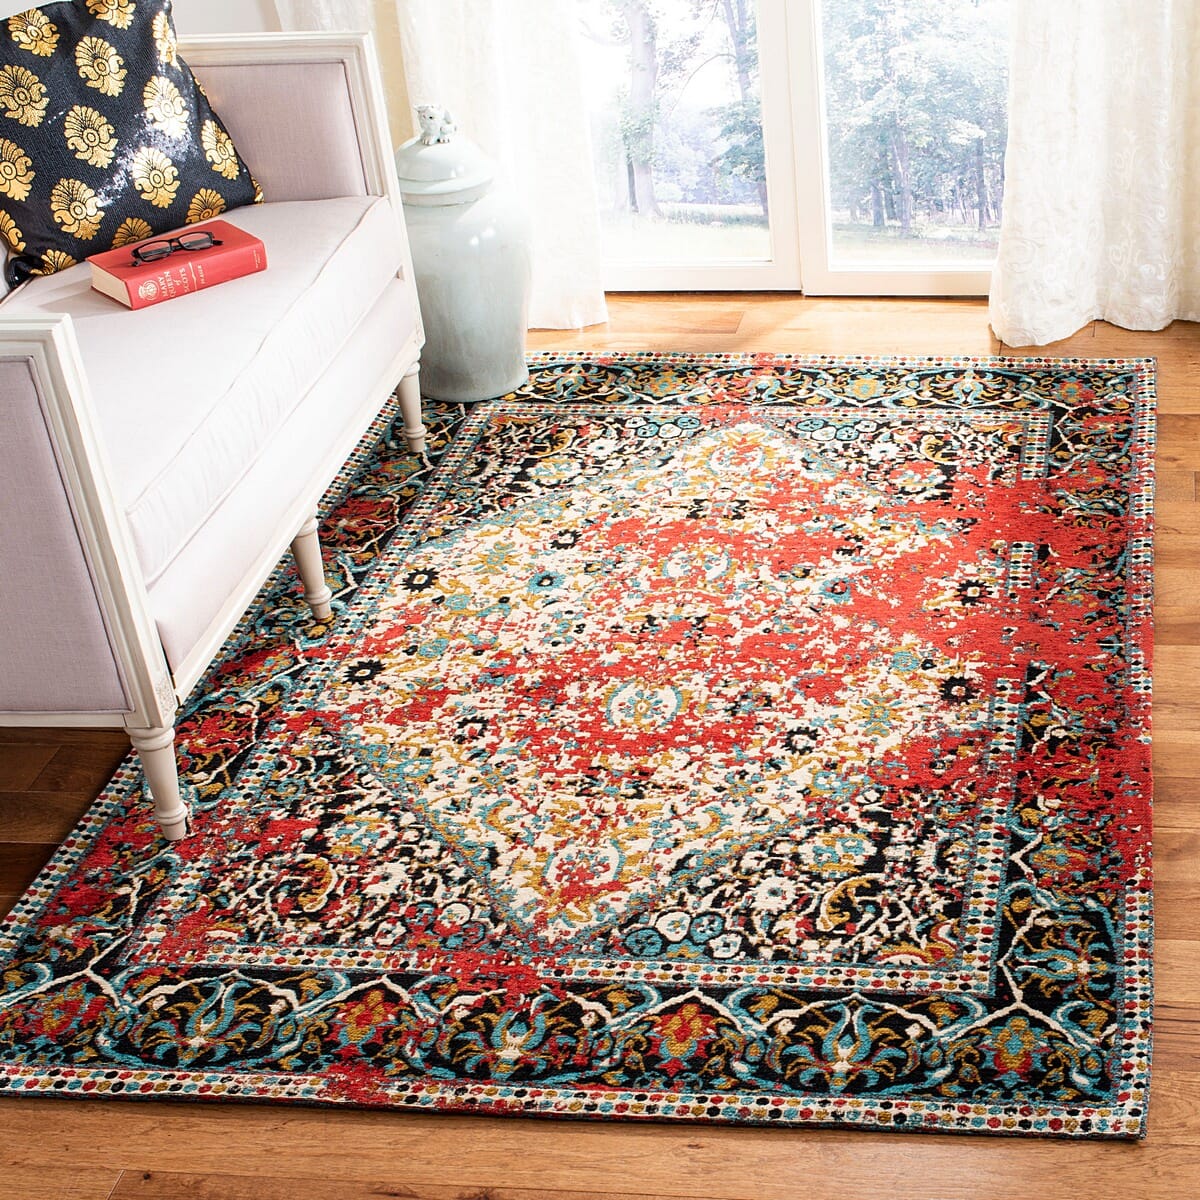 Safavieh Classic Vintage Clv701Q Red / Charcoal Vintage / Distressed Area Rug